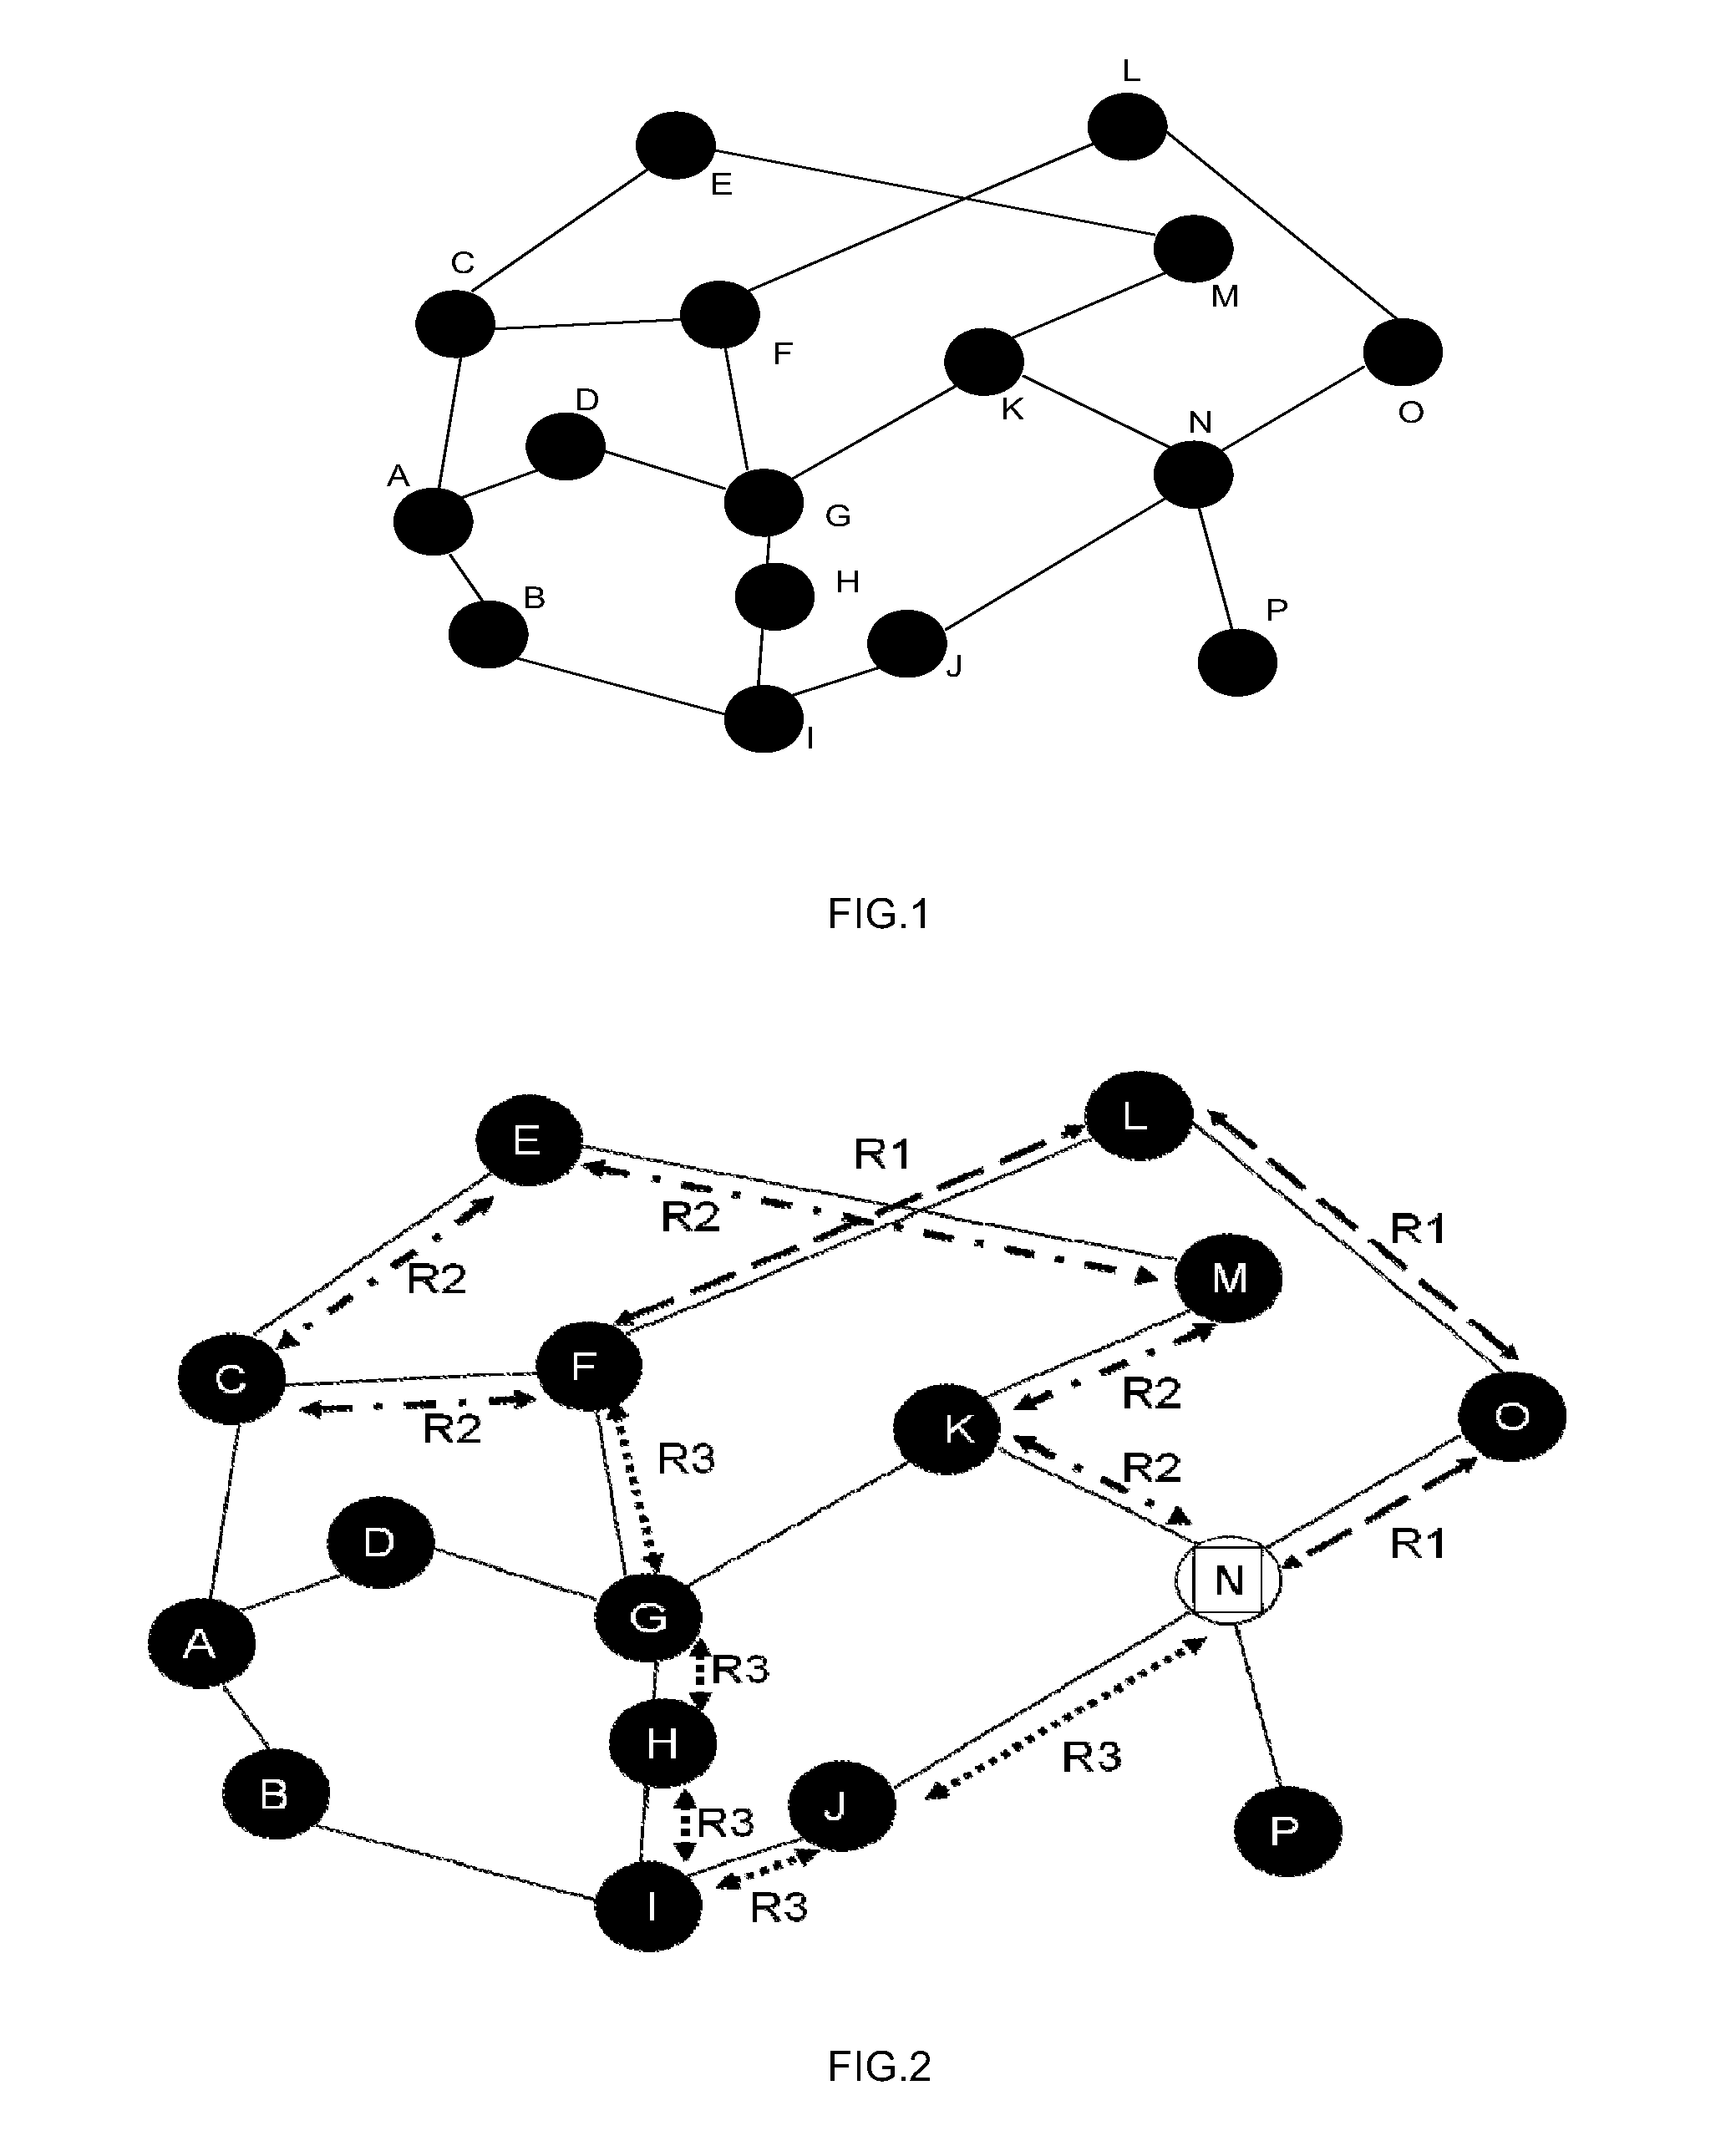 Method of percolation networking architecture for data transmission and routing